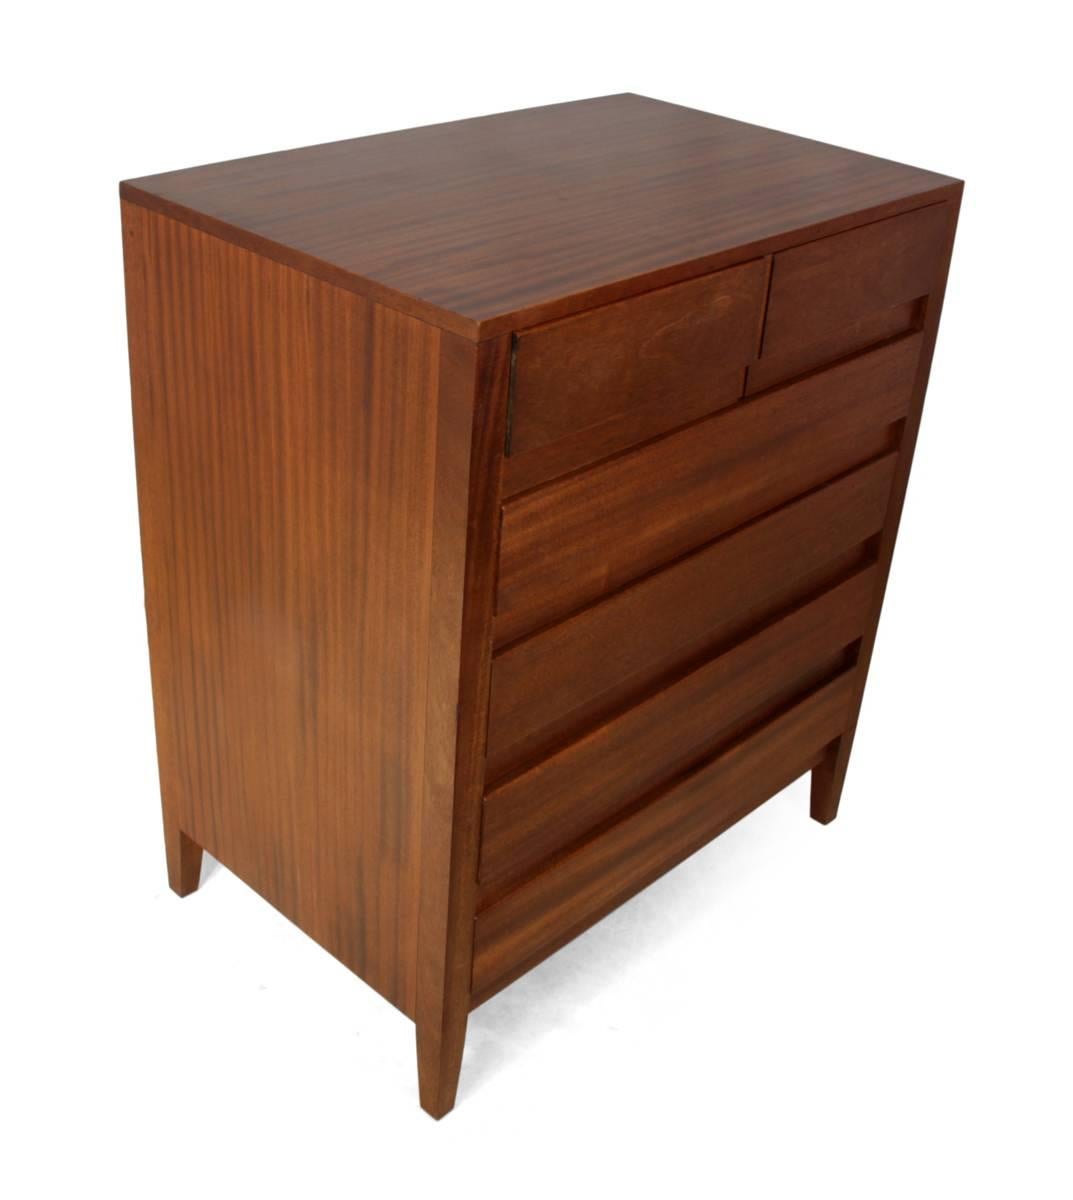 Mid-Century teak chest of drawers by Golden Key
An American produced Mid-Century chest of drawers, very good quality dovetail construction, sculpted hidden handles in original condition with few age related marks
Age: 1960
Style: Mid-Century